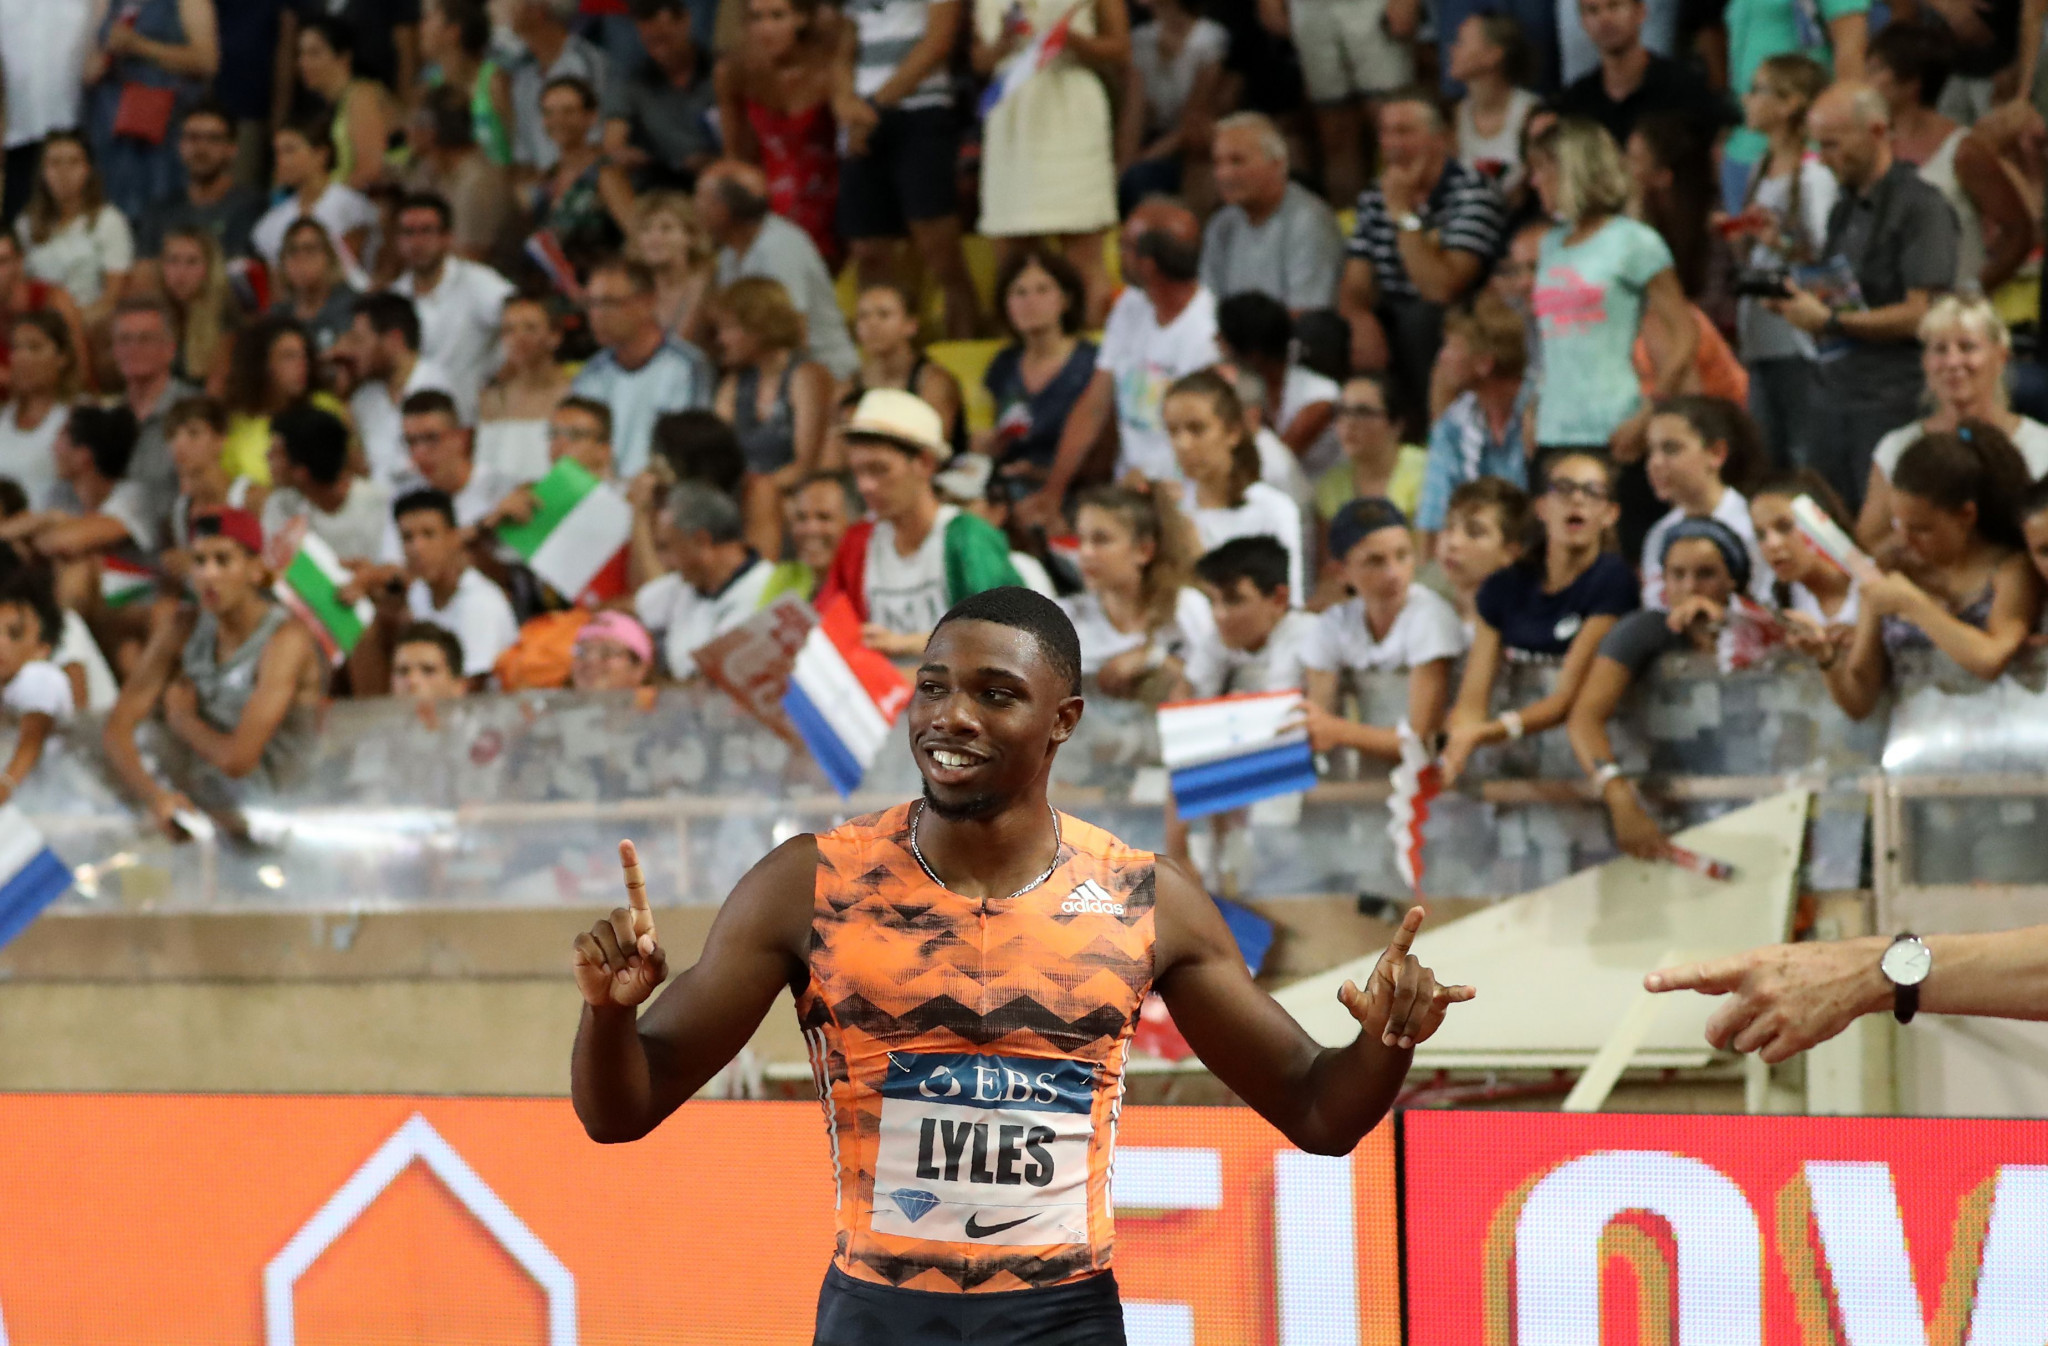 Noah Lyles, joint leader of this year's world 100m rankings with 9.88sec, meets US compatriot Christian Coleman in an eagerly-anticipated race ©Getty Images